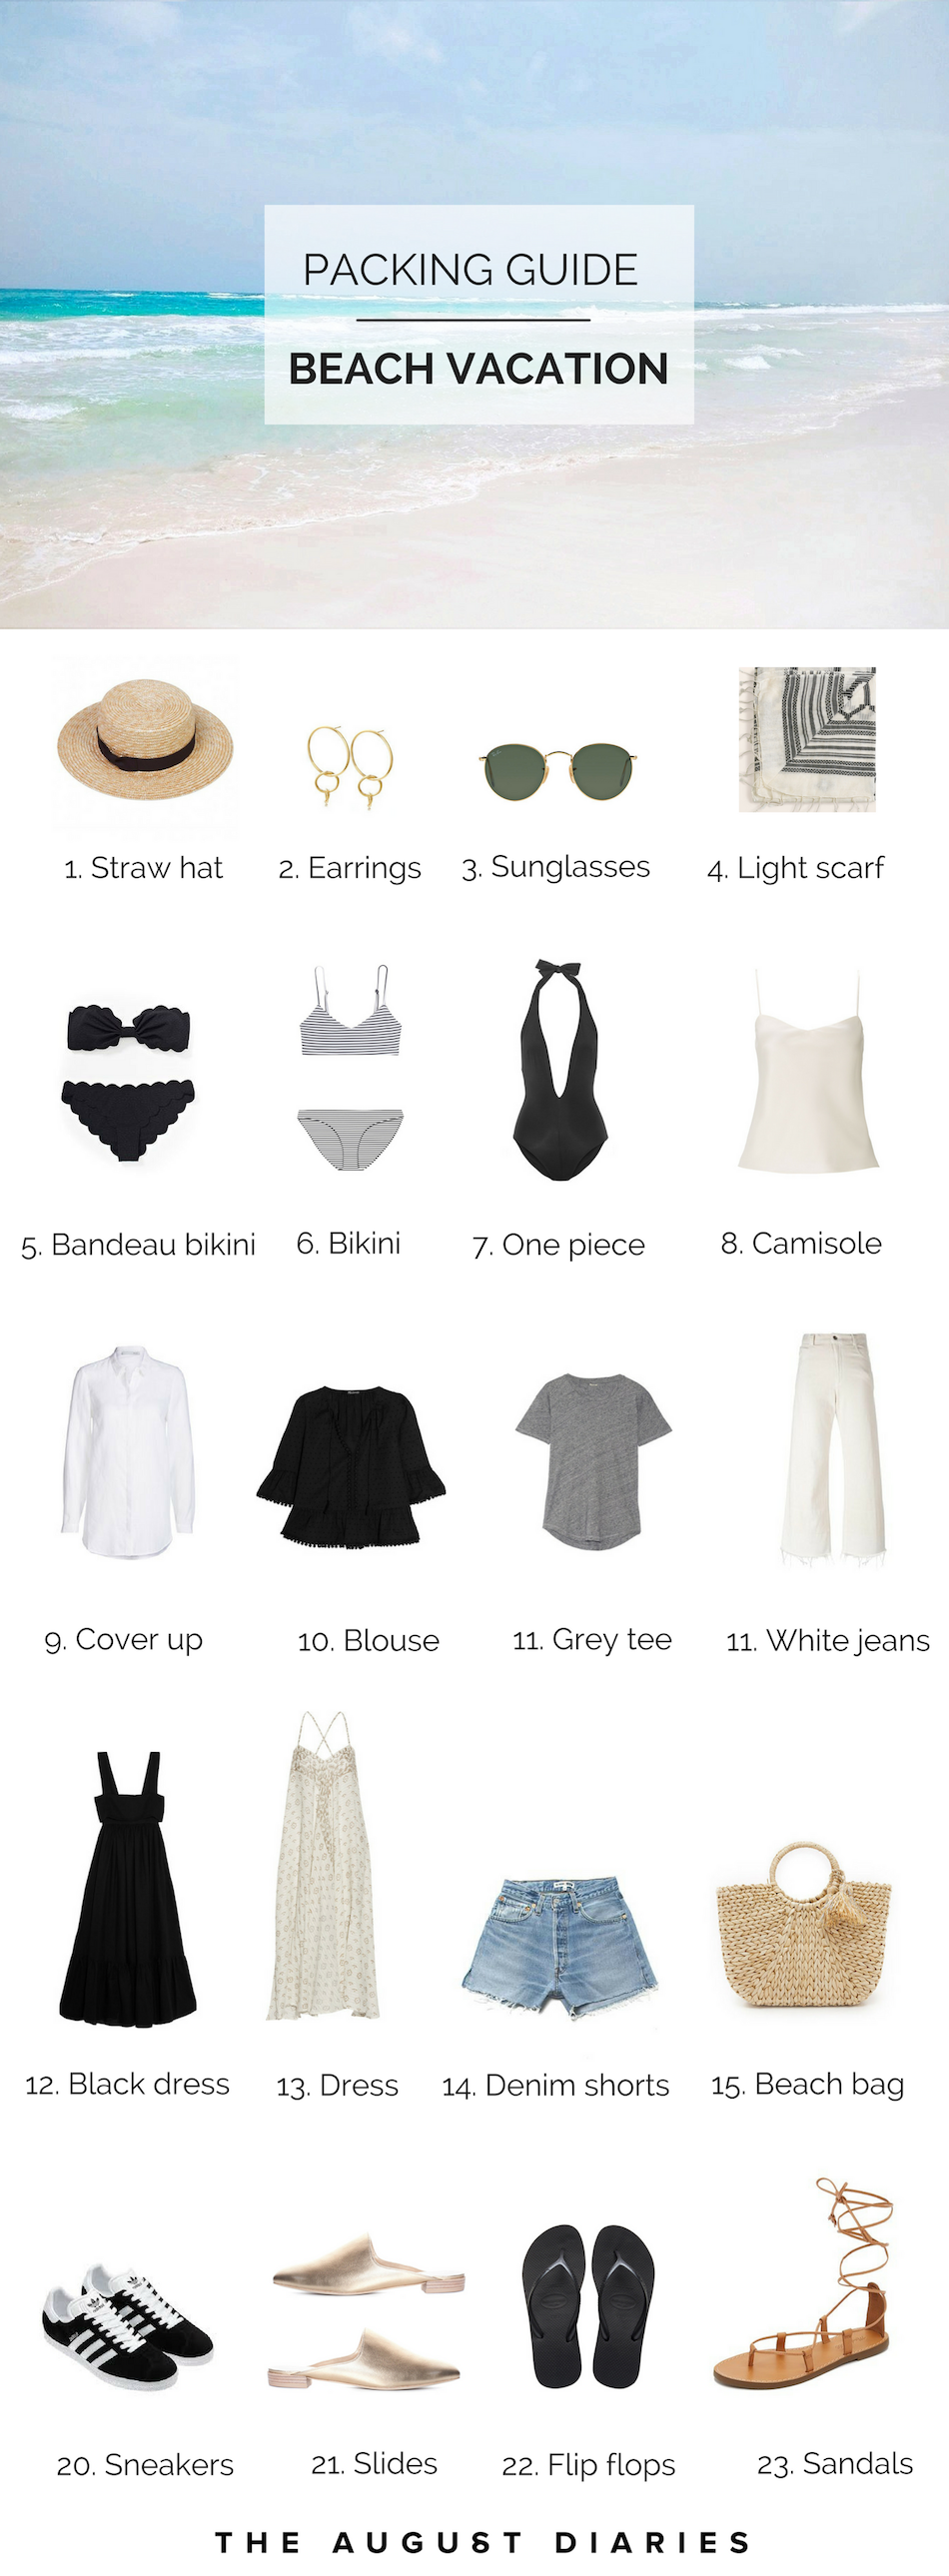 beach vacation packing guide list